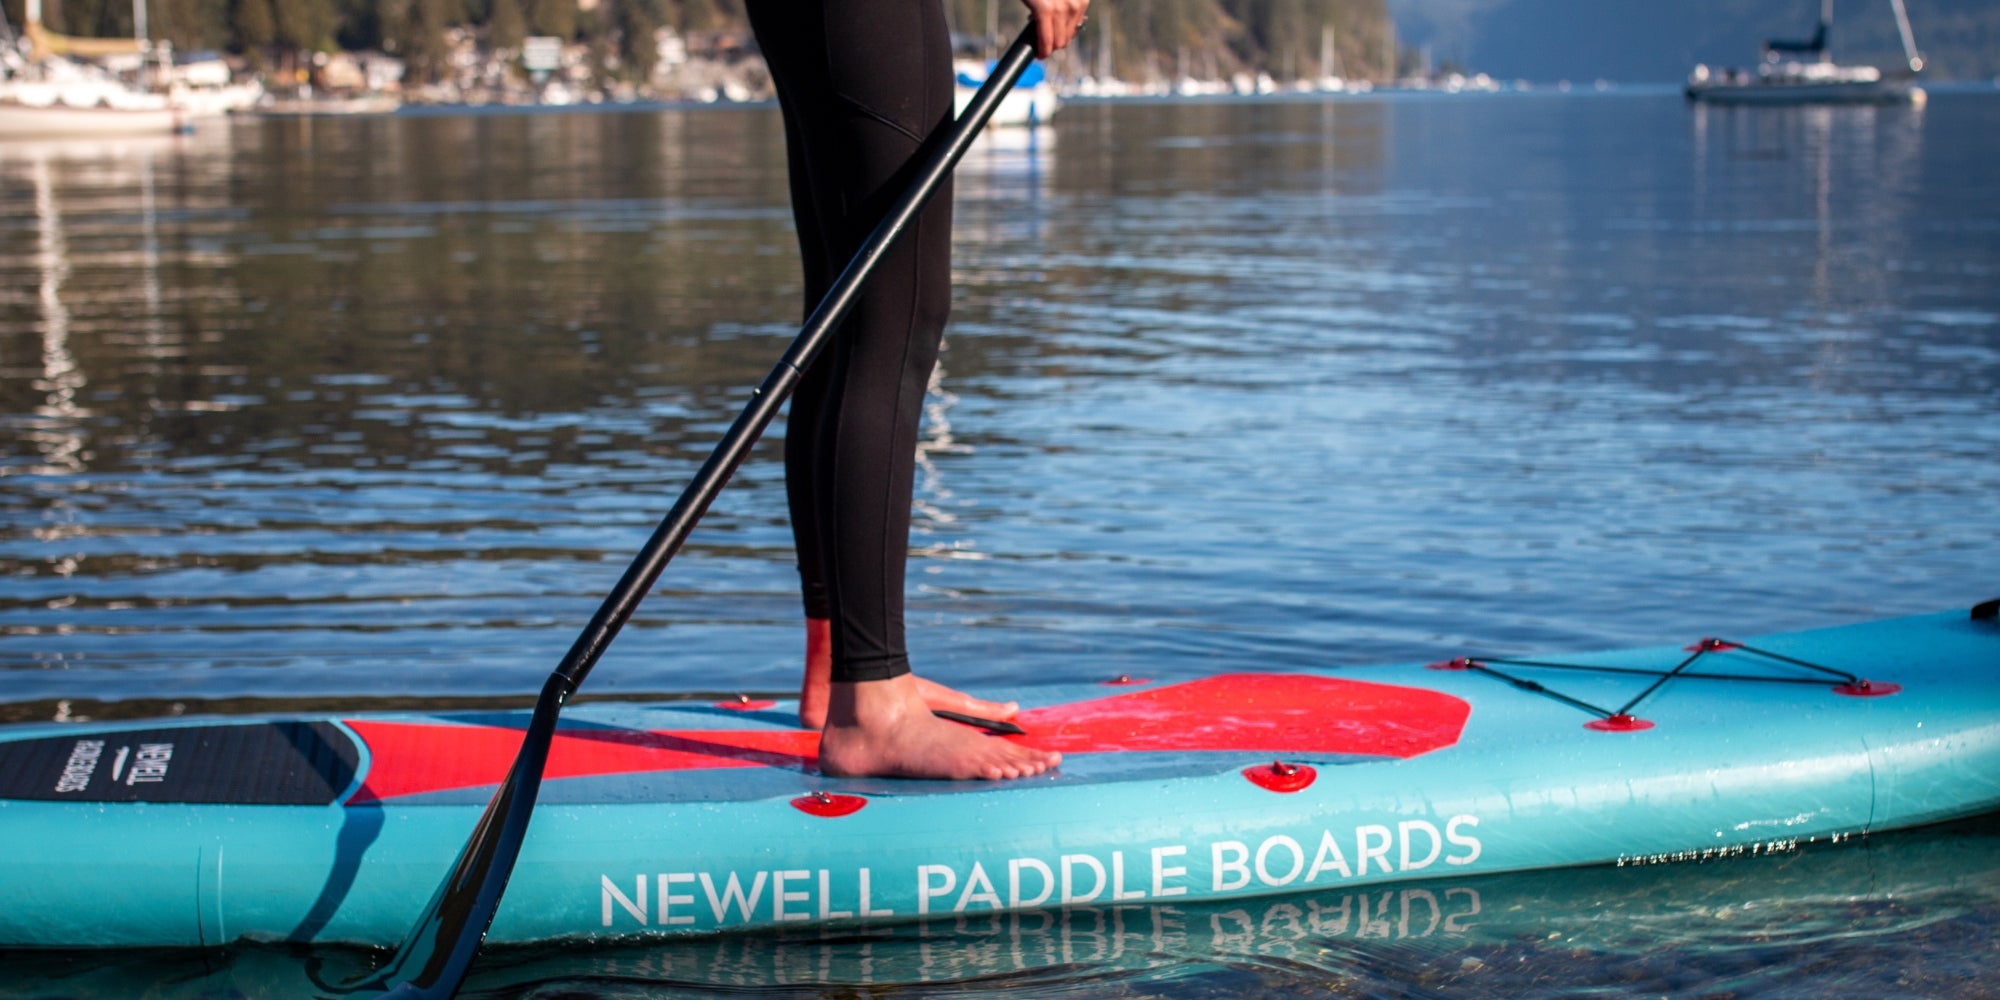 Newell Paddleboards